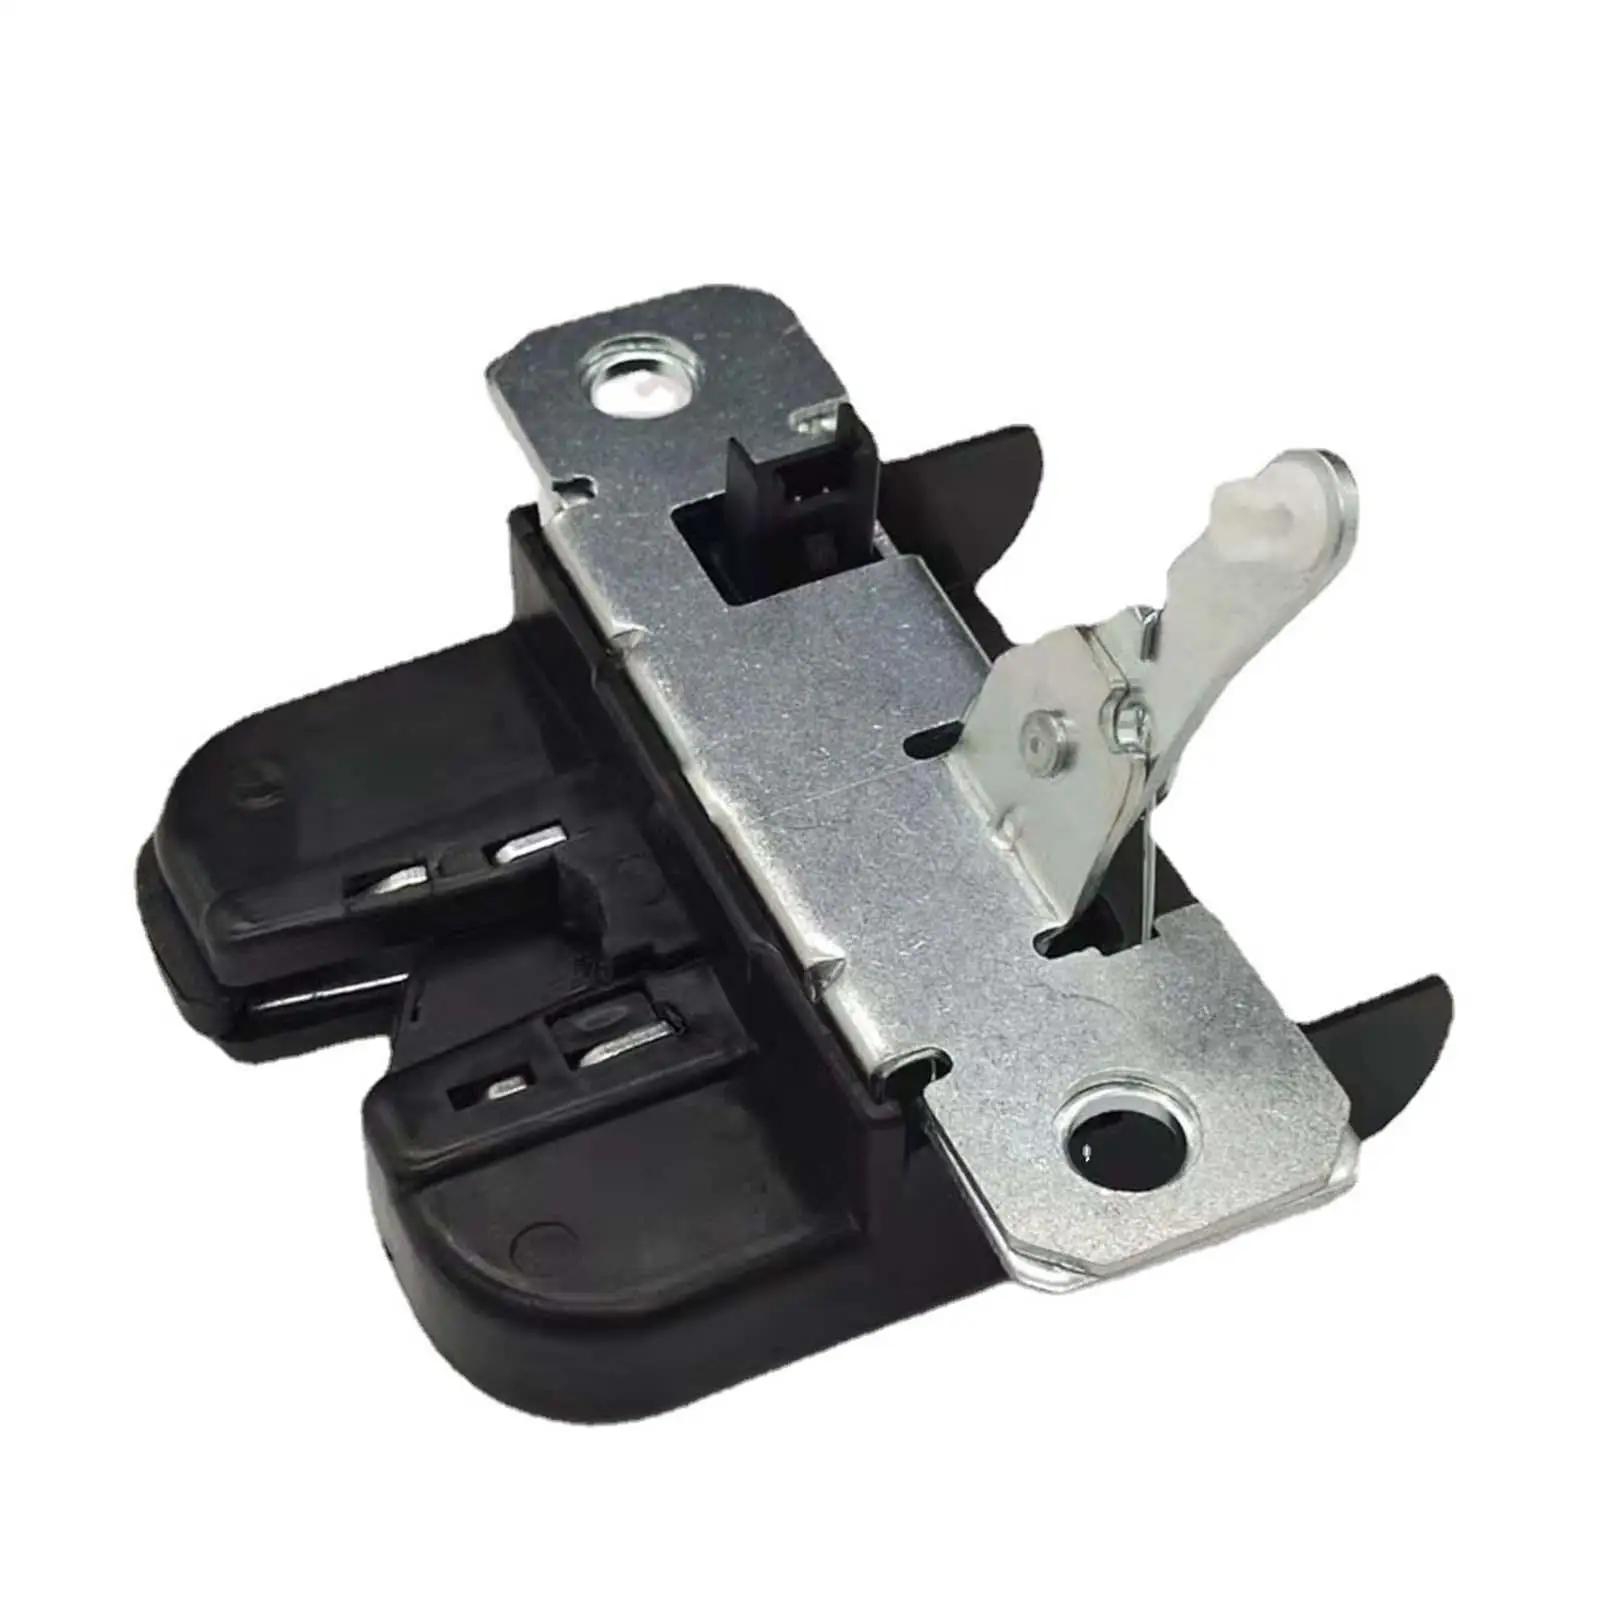 Rear Tailgate Trunk Latch Lock Actuator 1J6827505 Replaces 1J6827505C for VW Polo Vehicle Spare Parts Easily Install Sturdy